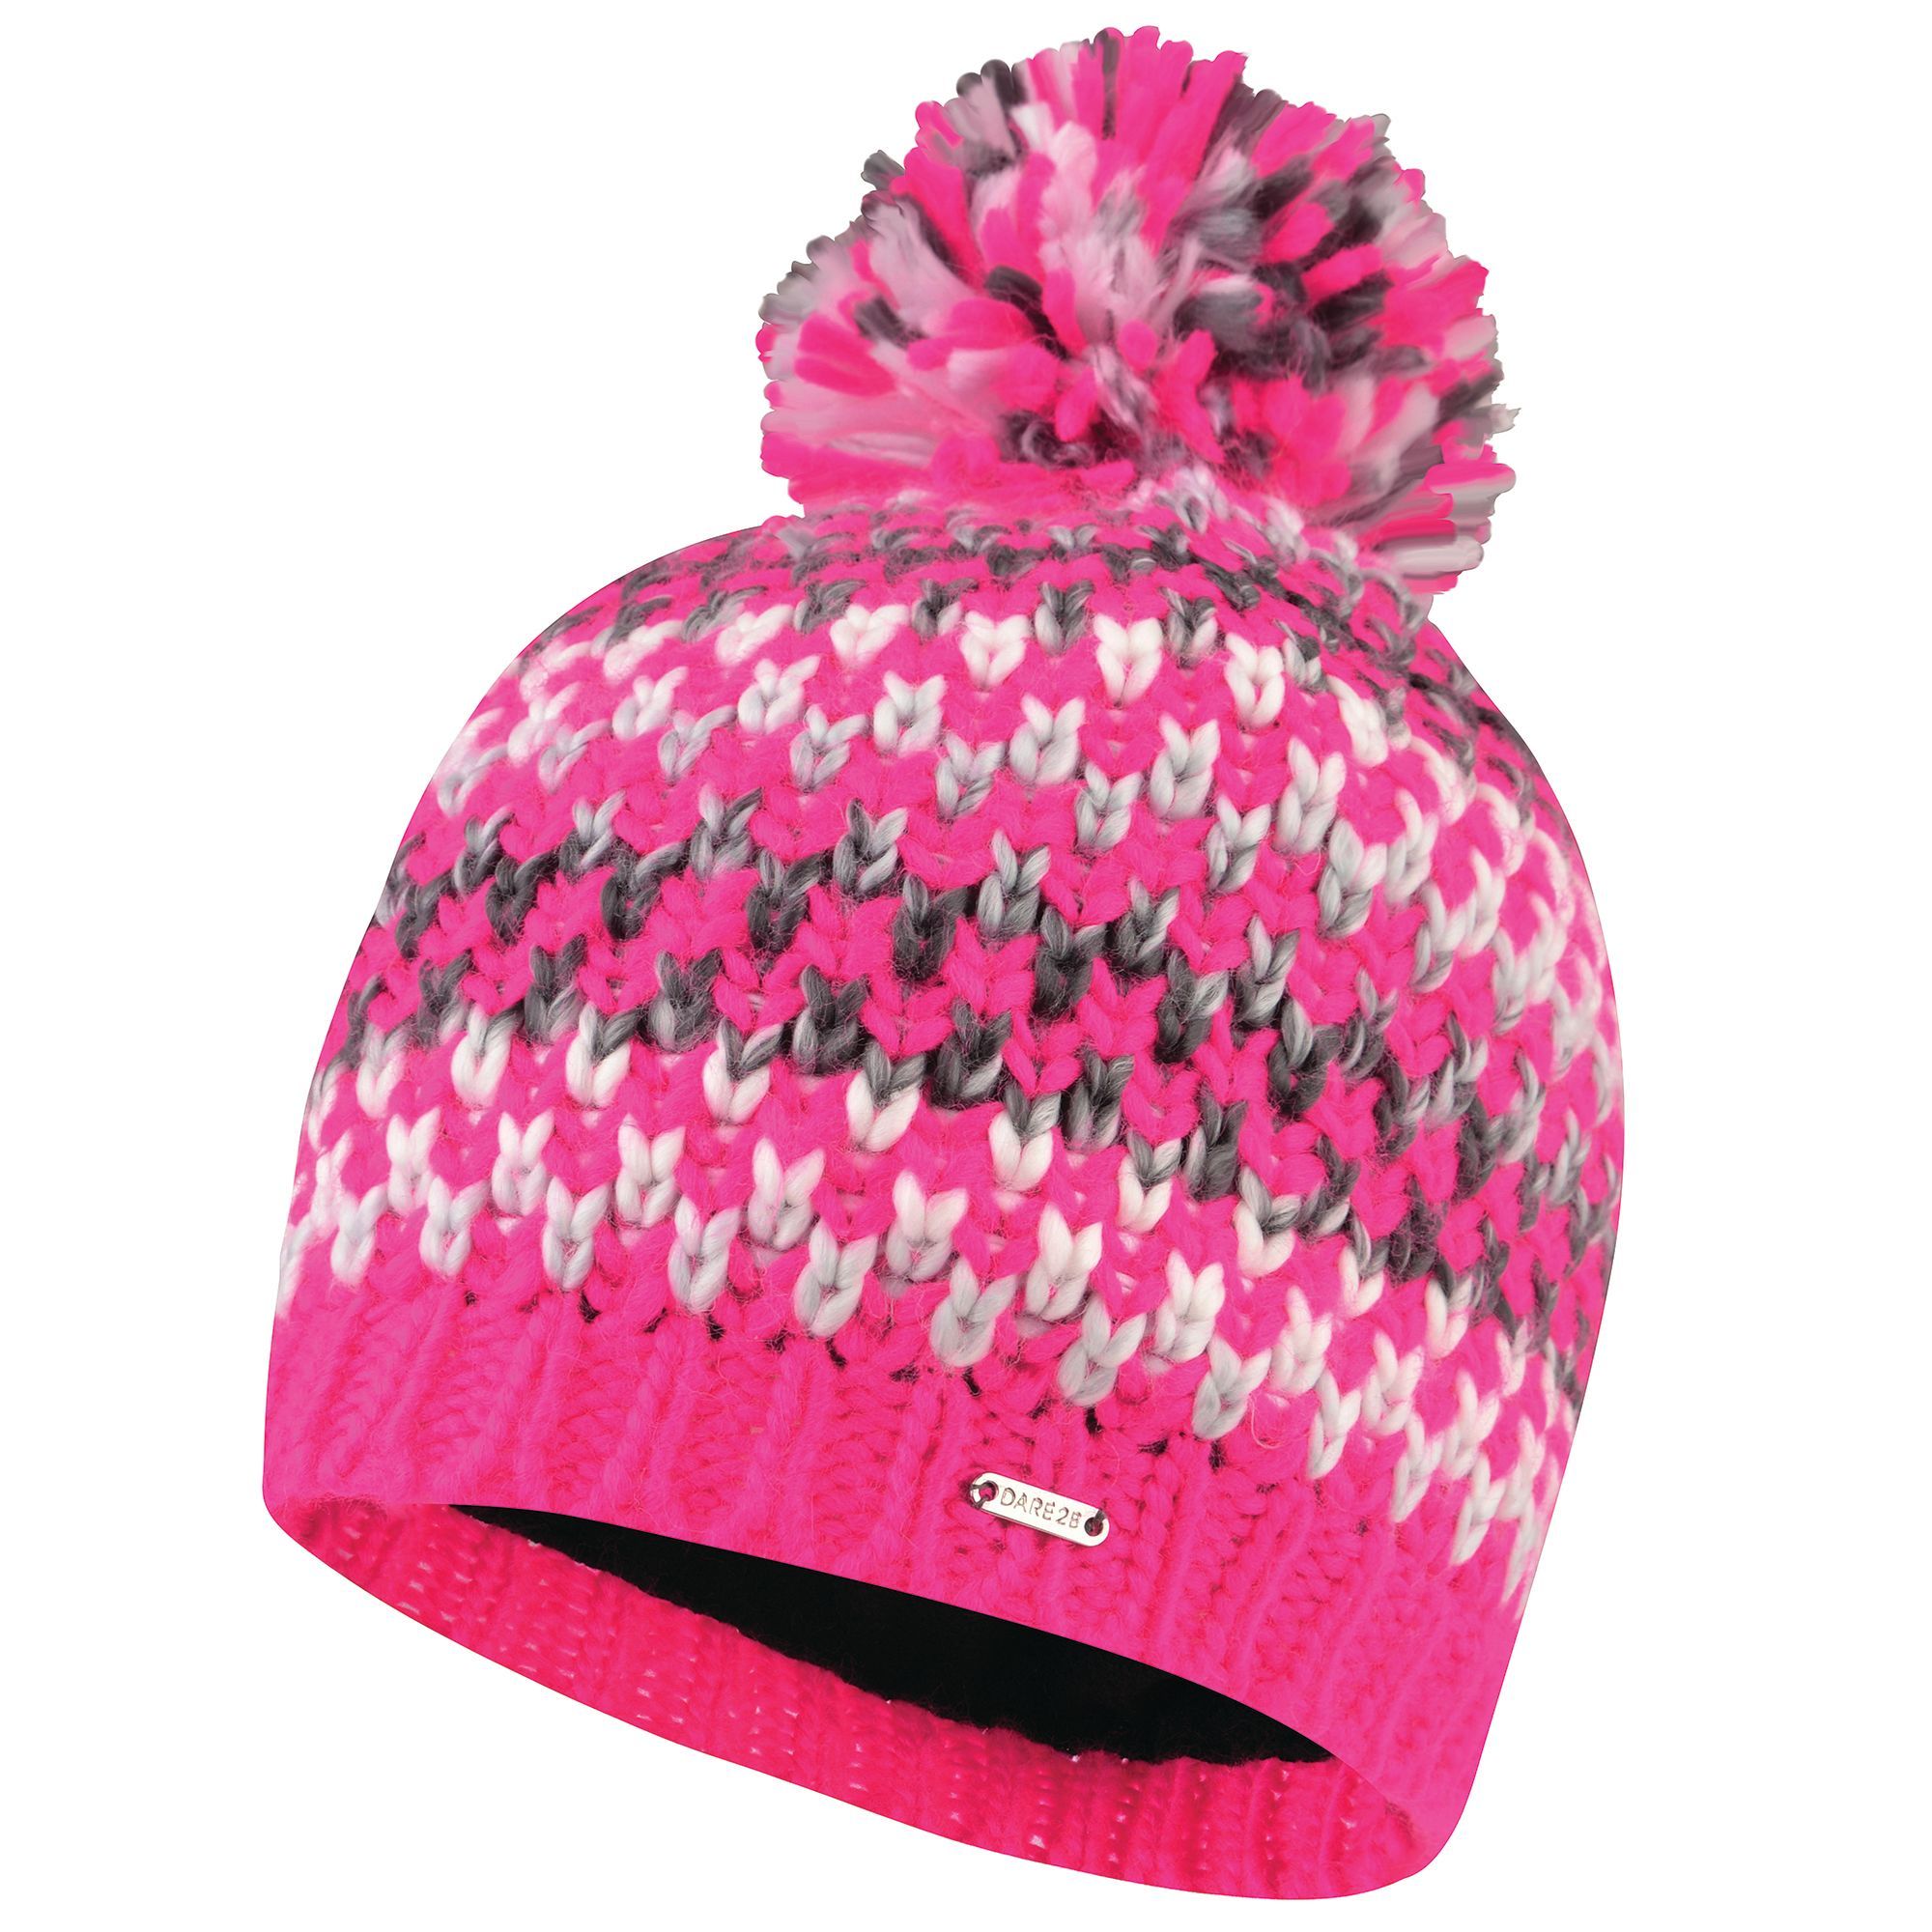 Material: acrylic: 100%. Soft knit construction. Fleece lining. Bobble detail.